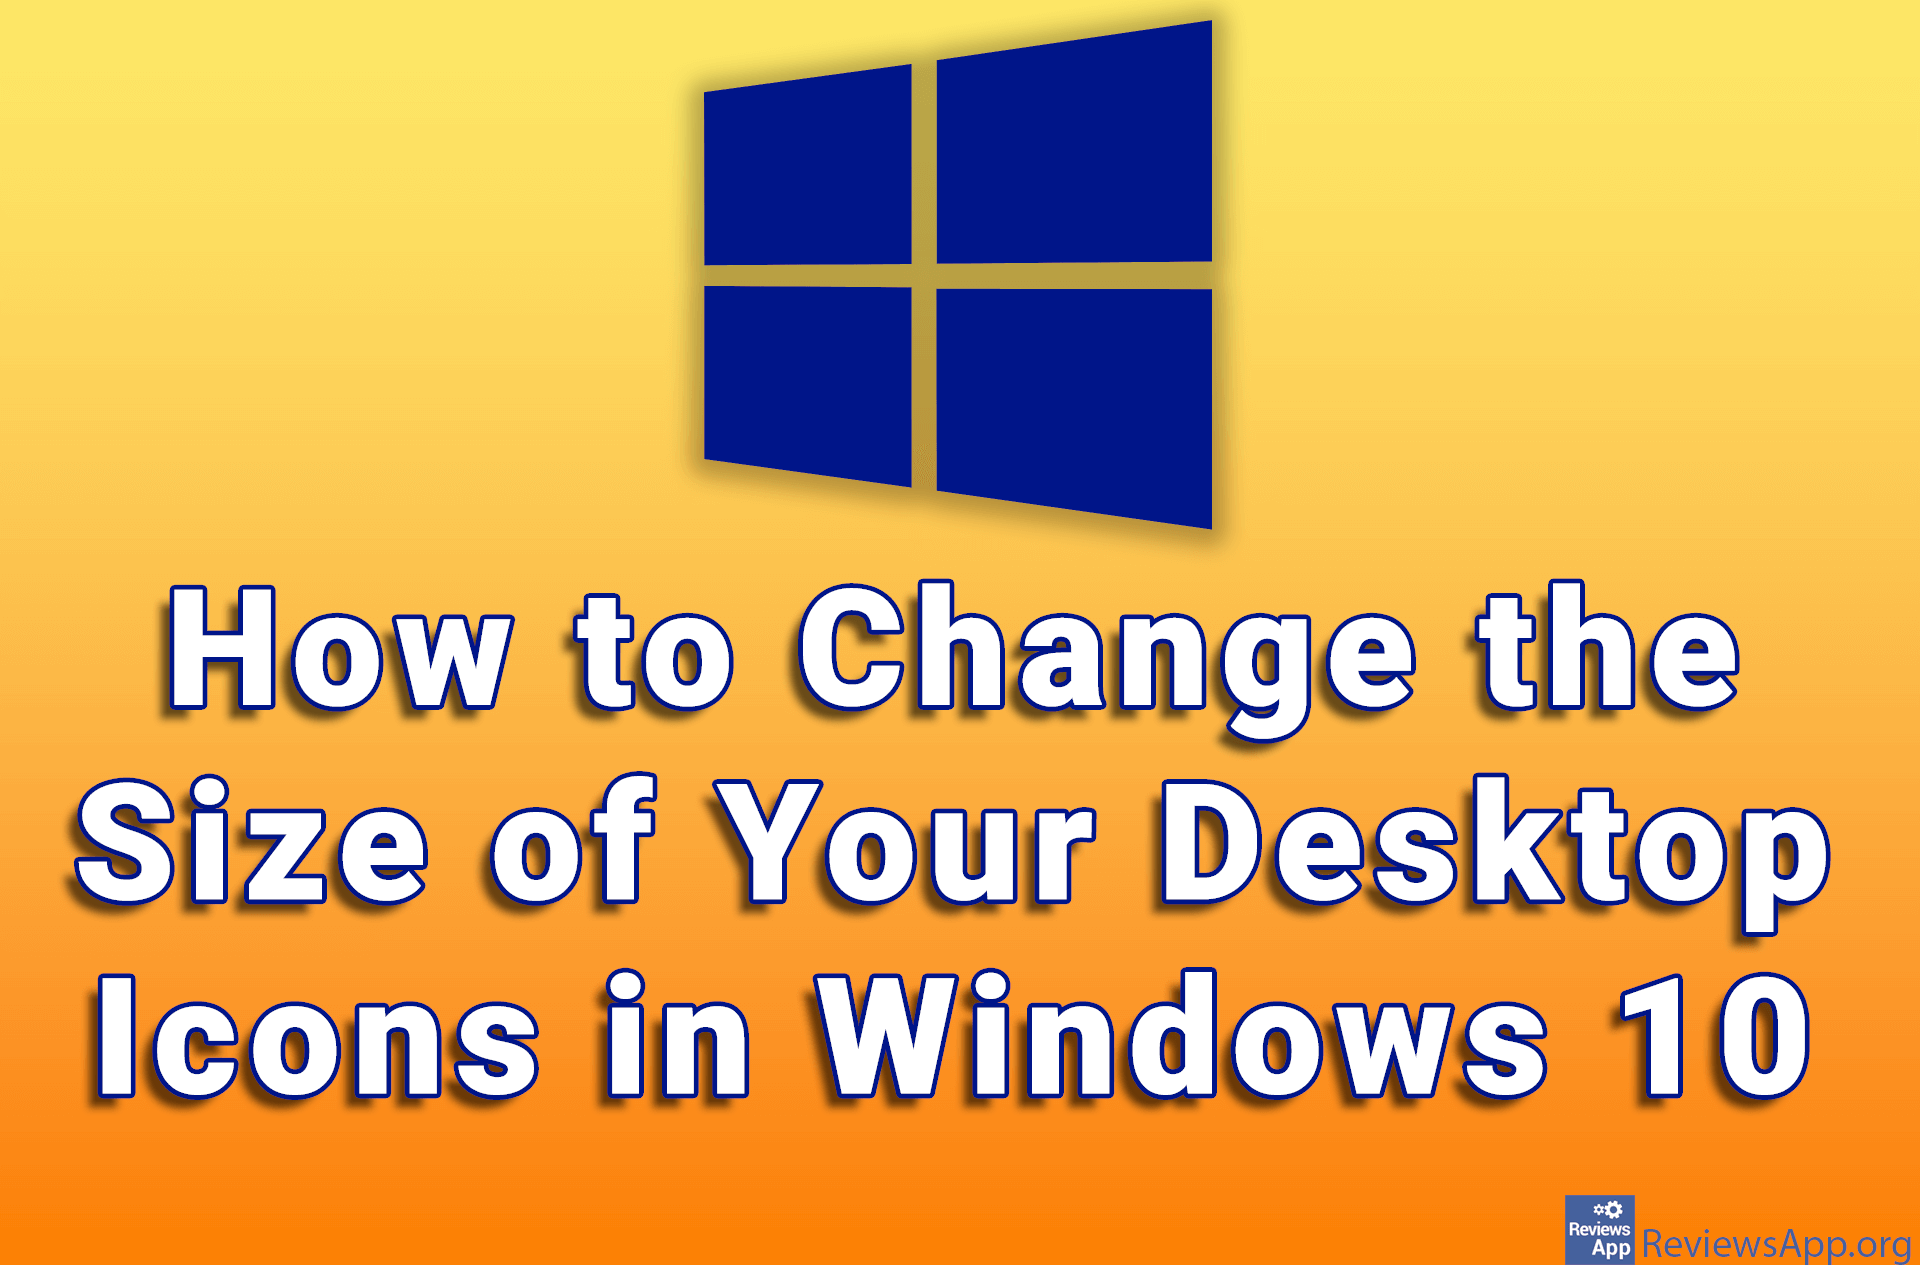 How to Change the Size of Your Desktop Icons in Windows 10